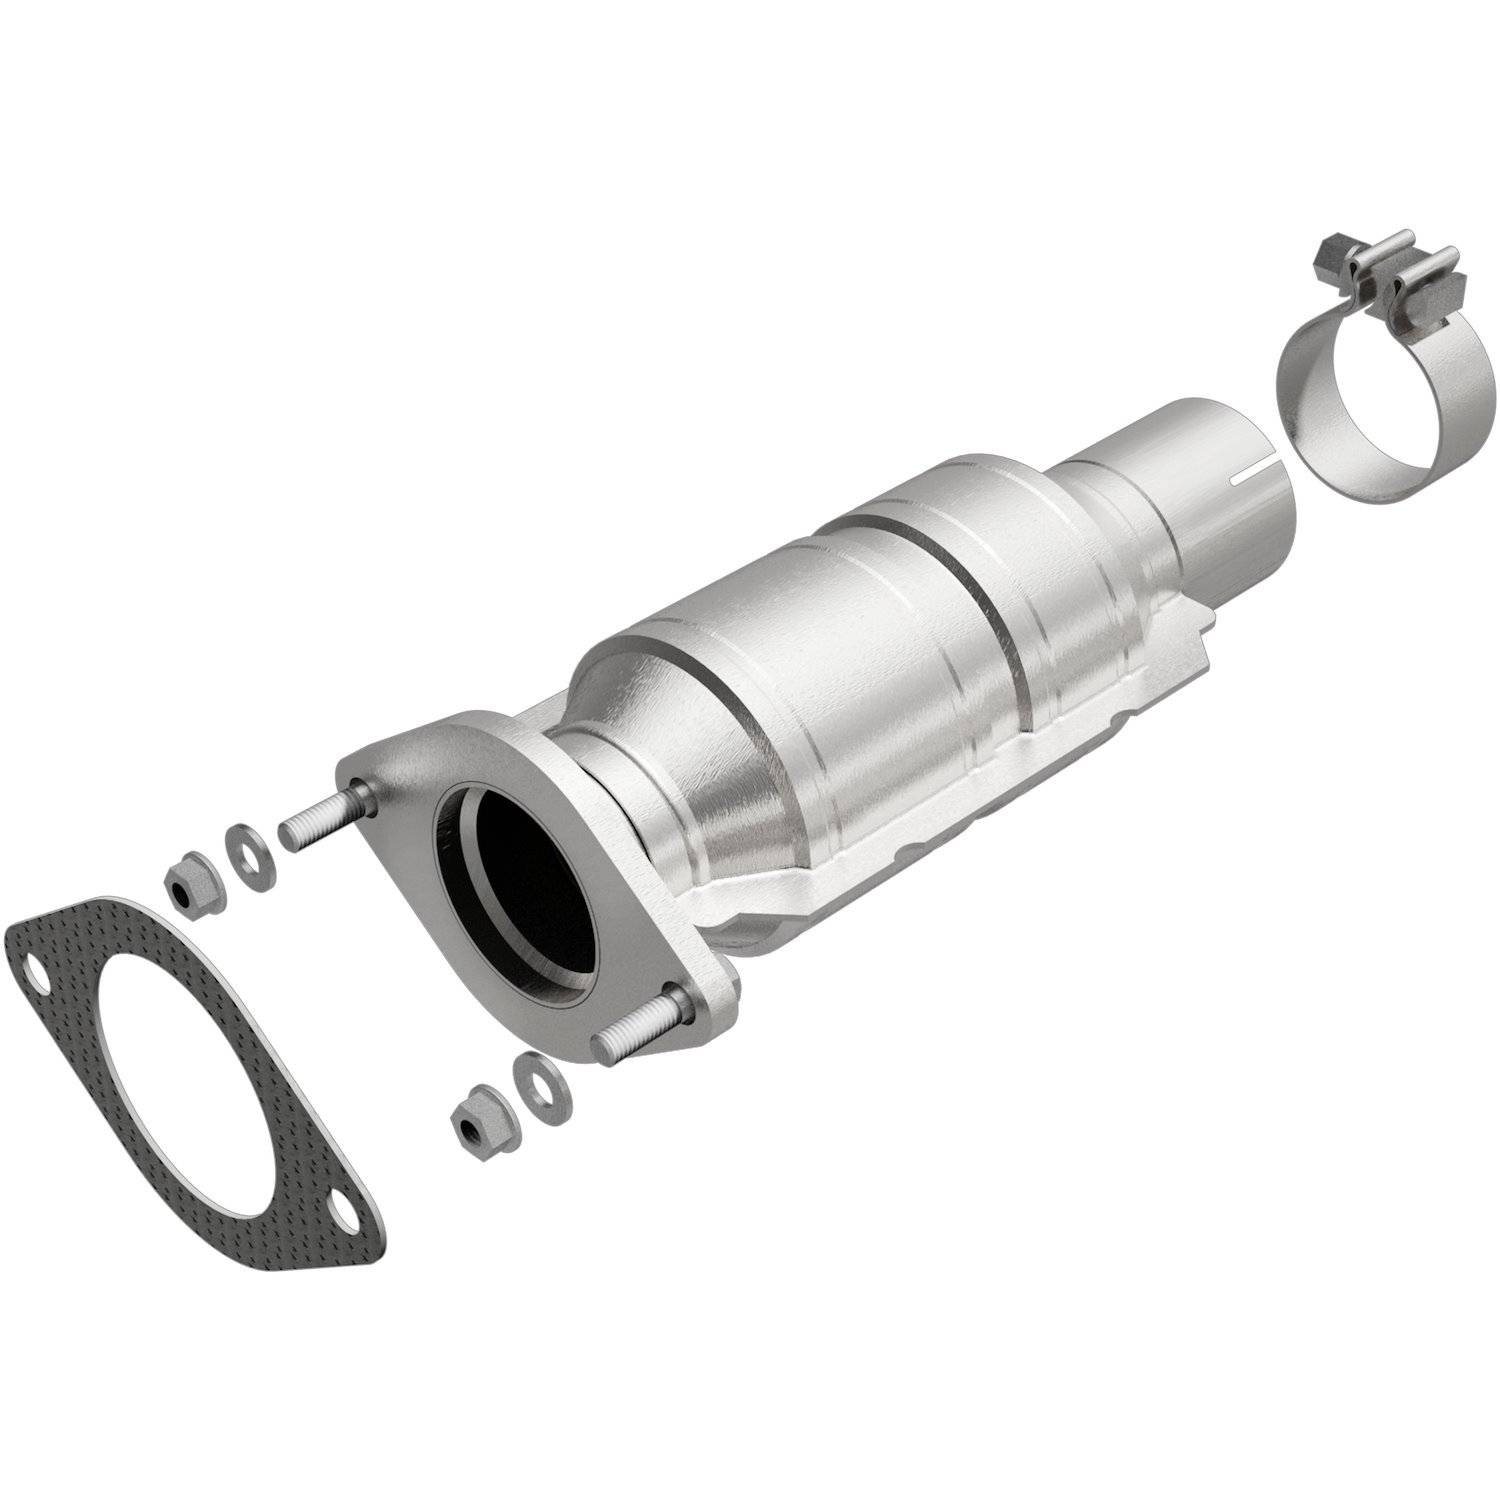 OEM Grade Federal / EPA Compliant Direct-Fit Catalytic Converter 51269